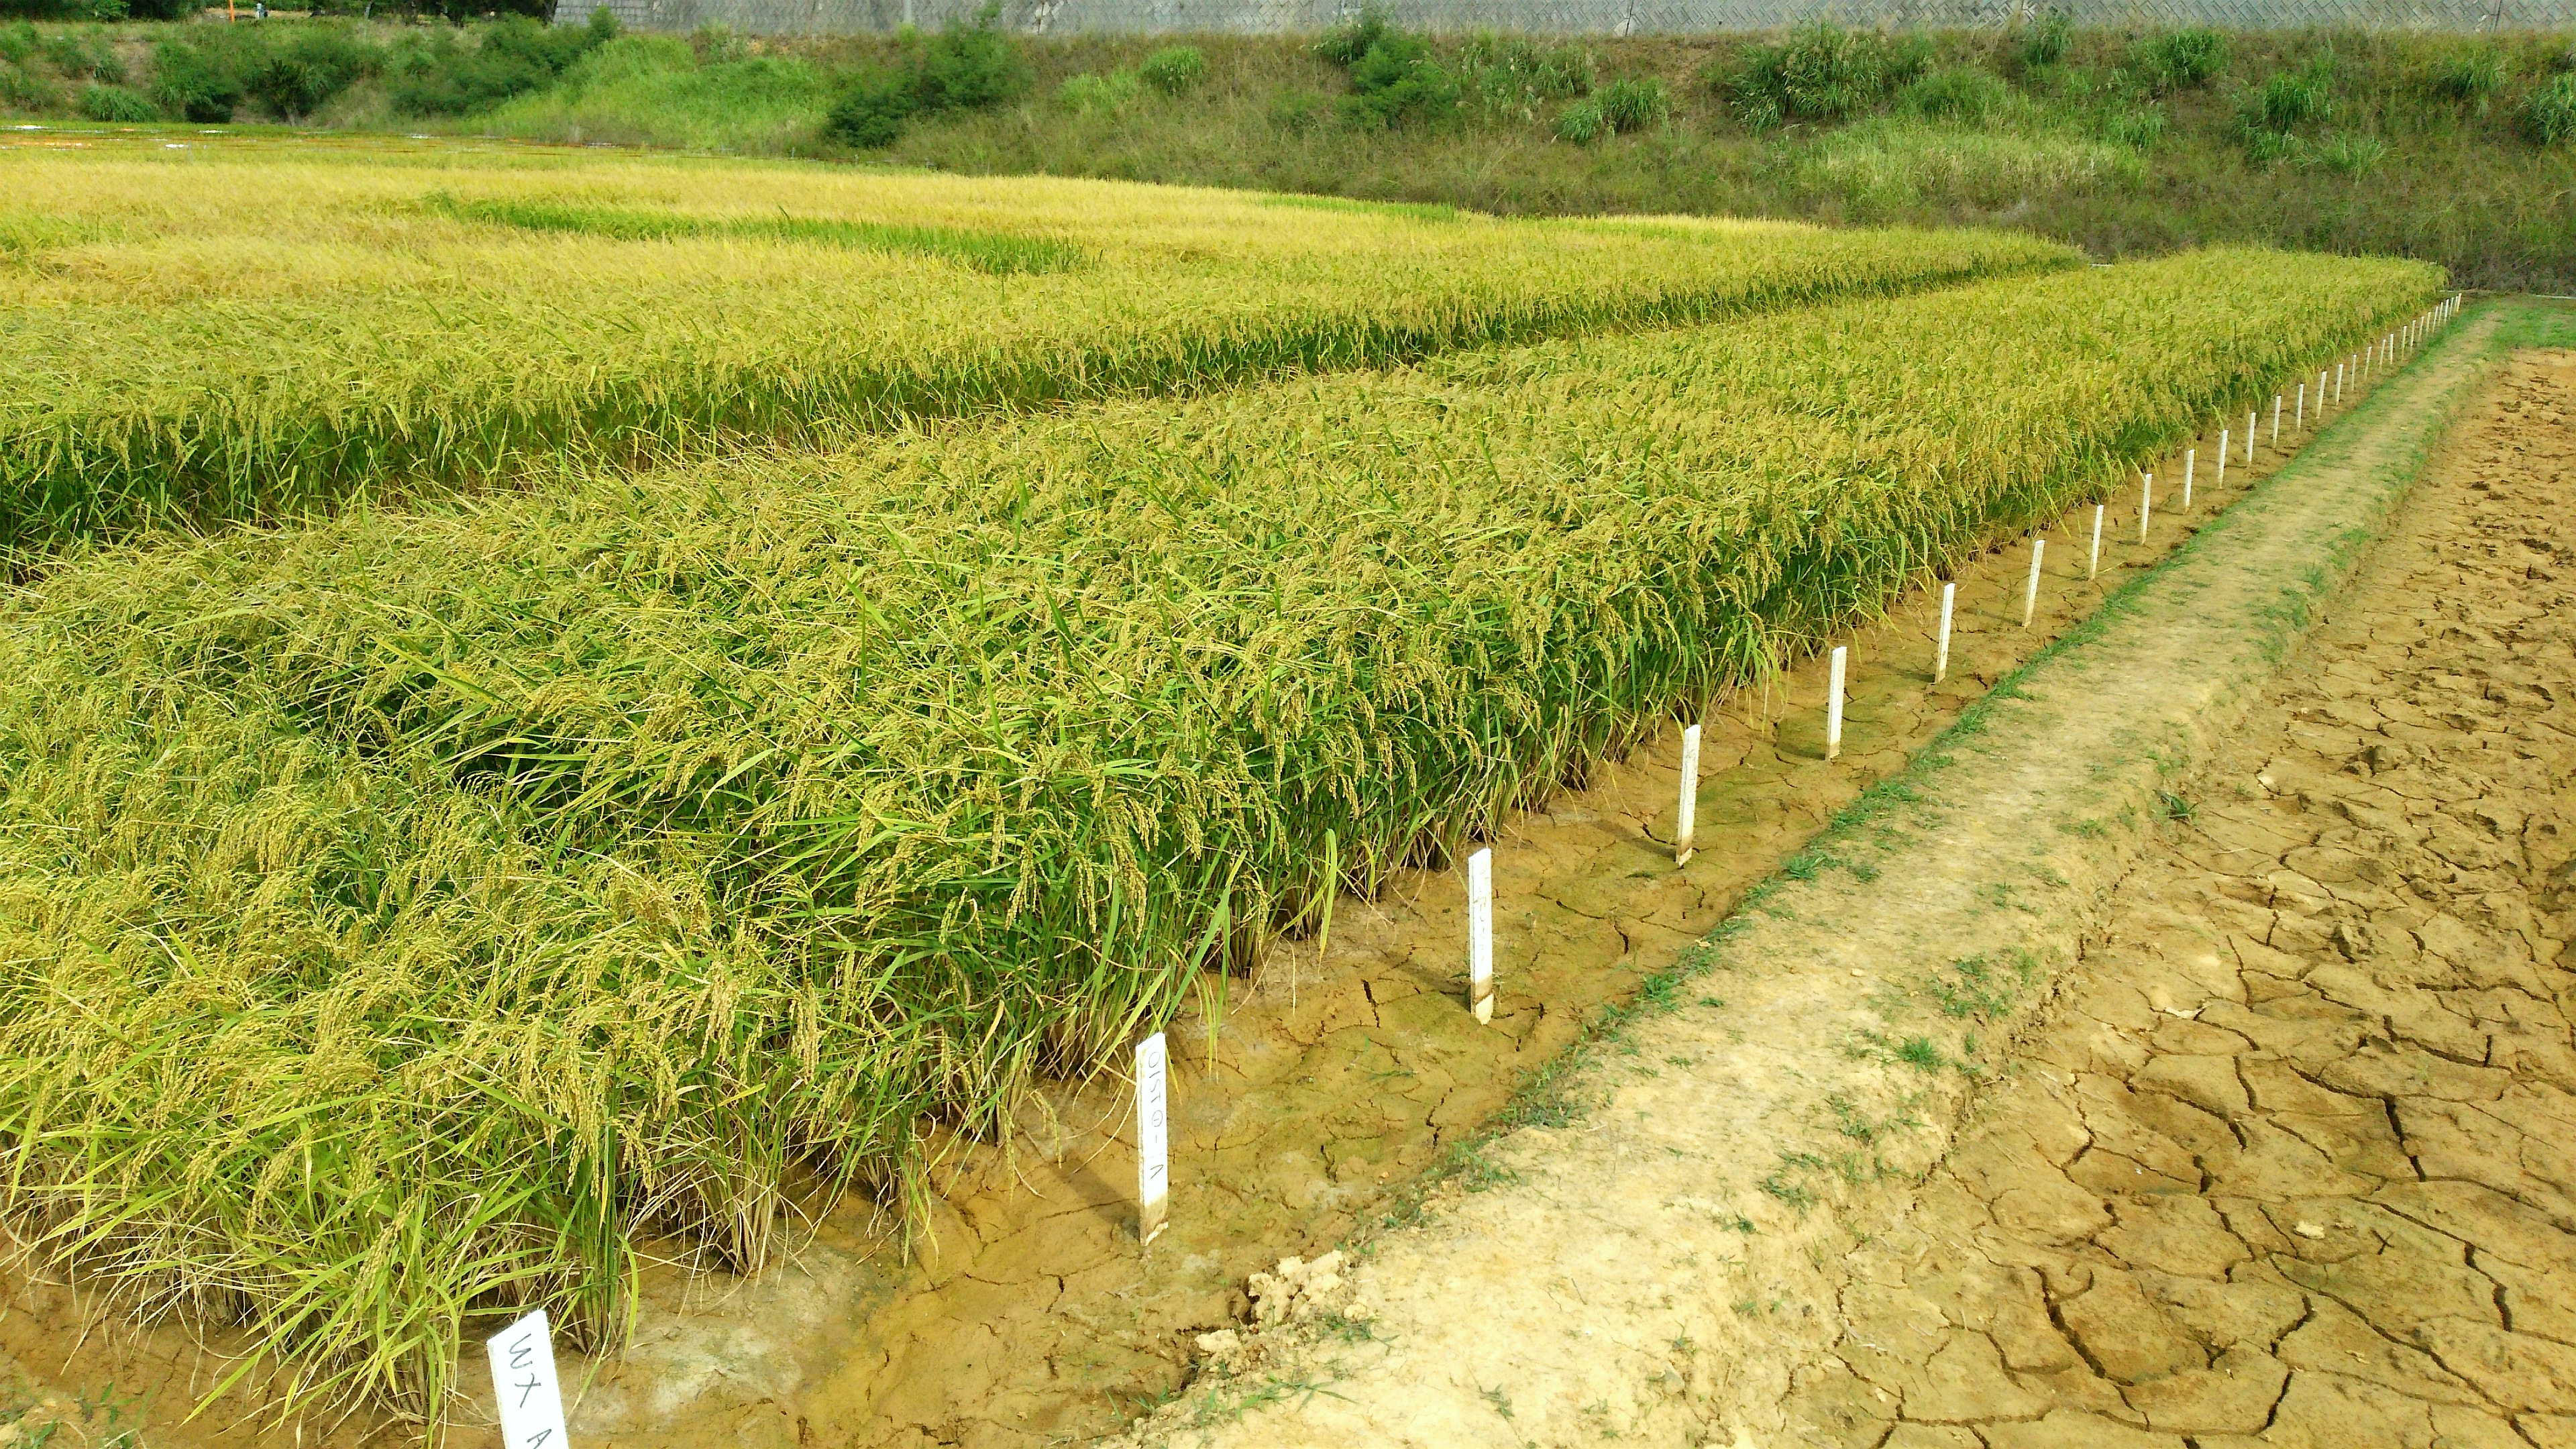 Ripening plots of a new resistant starch rice strain